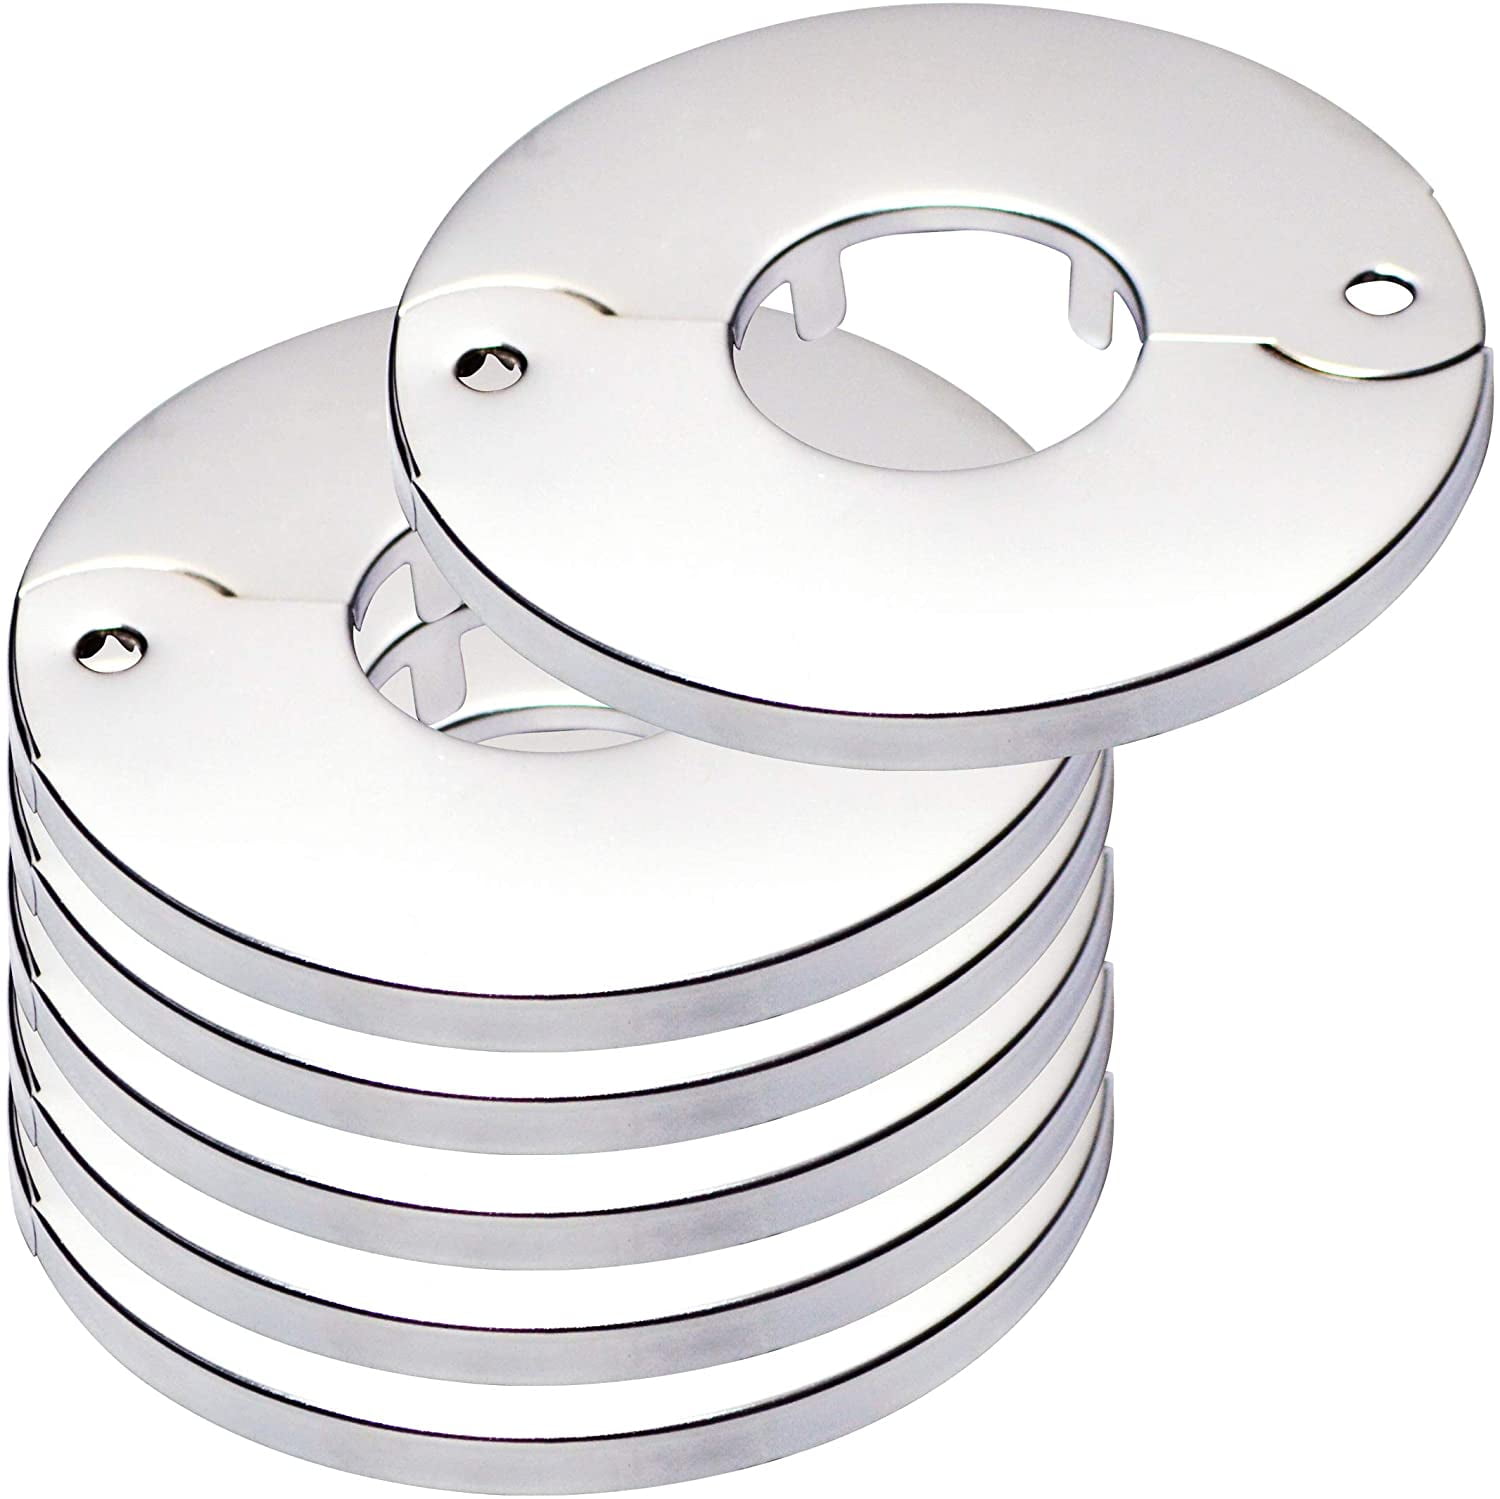 Avalon Floor And Ceiling Plate Split Flange Fits 1 Inch Ips Chrome Finish Pack Of 6 1416